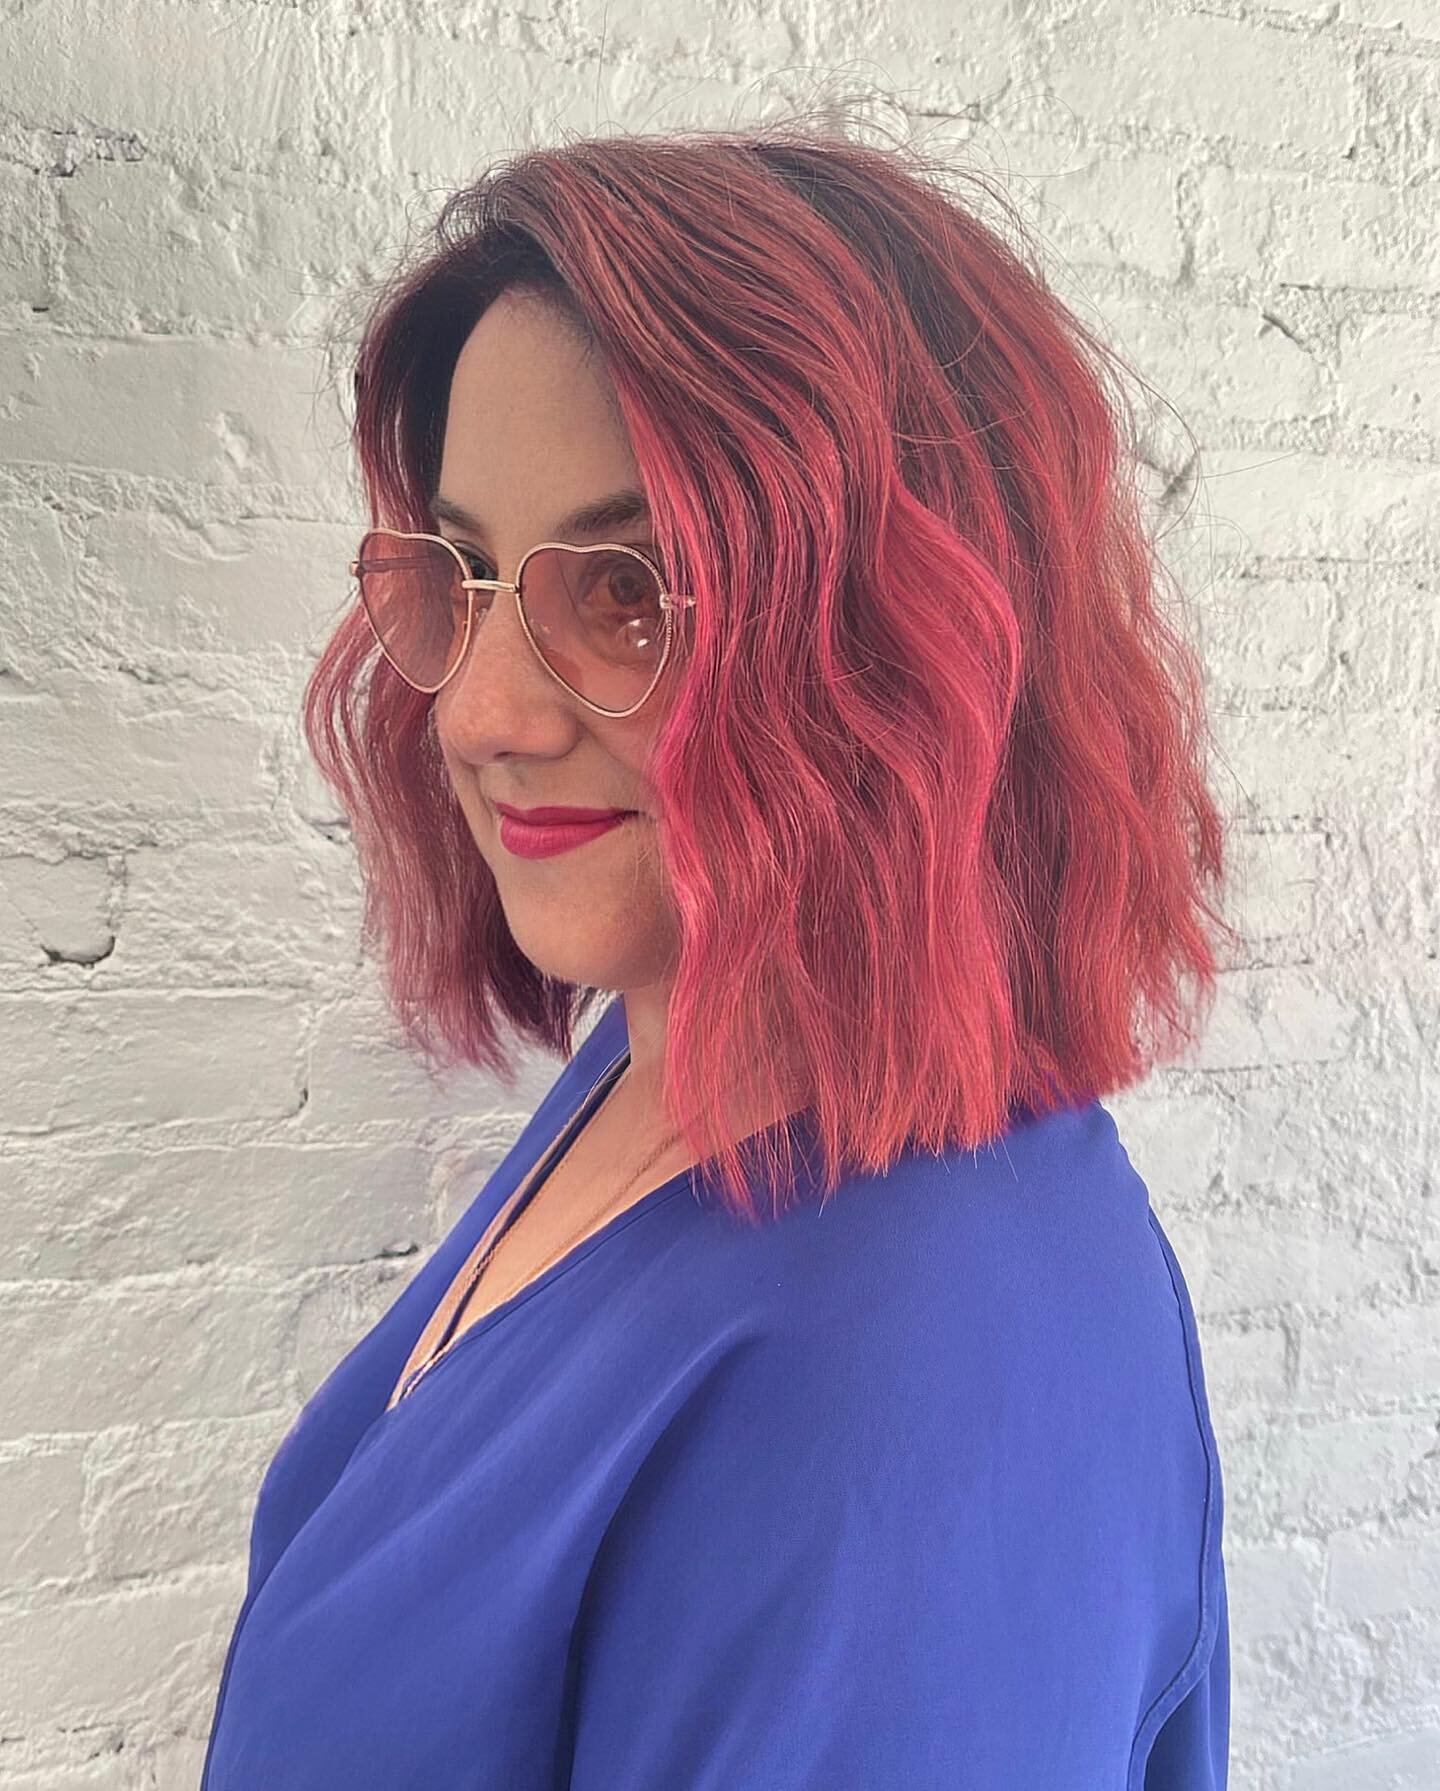 💕🦋💅🏼

Formula:
NG: Redken Color Gel 
5n + 5rv + 20vol

Pink: Pulp Riot Cupid

Did you know that your hair can be a reflection of your overall health?

As a hairstylist, I encourage you to check with your doctor if you notice sudden hair loss, exc